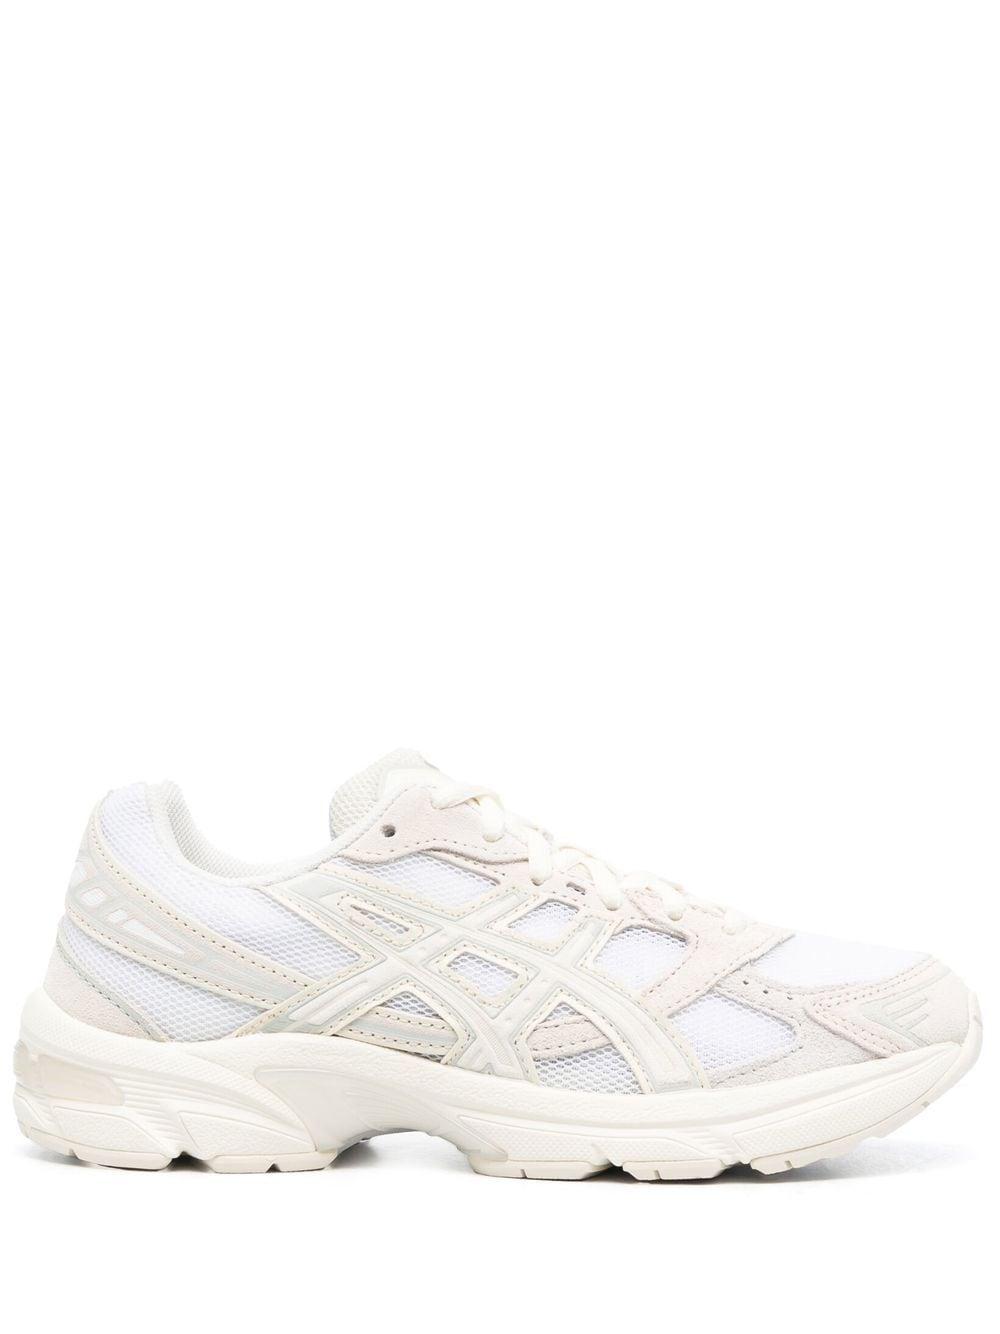 Asics Gel Panelled Low-top Sneakers in White | Lyst